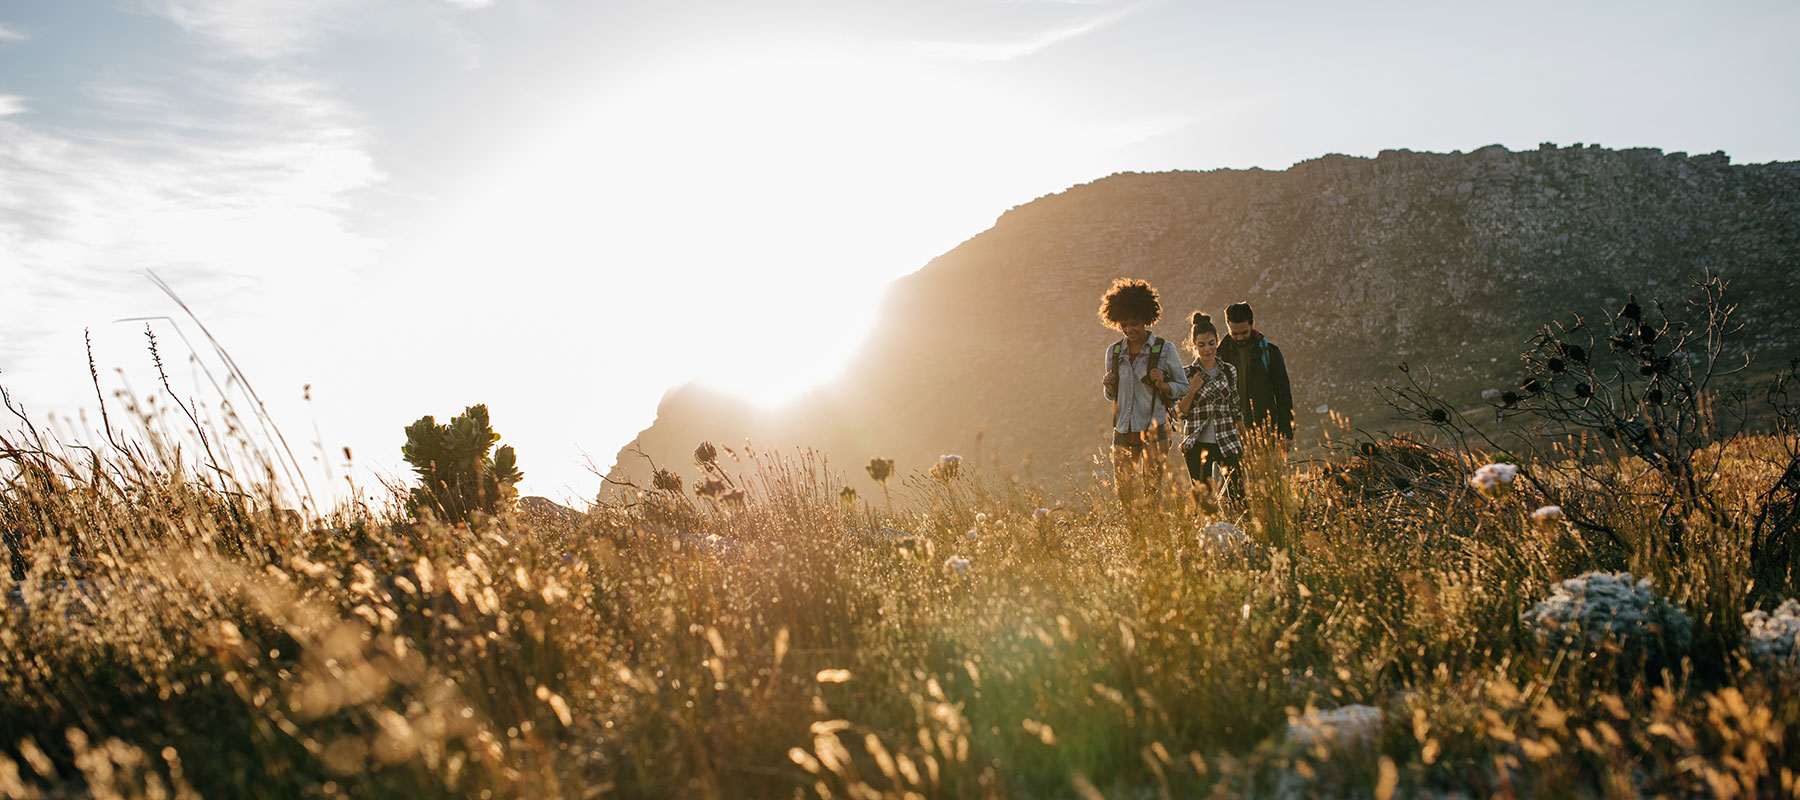 Youth Hiking at sunset